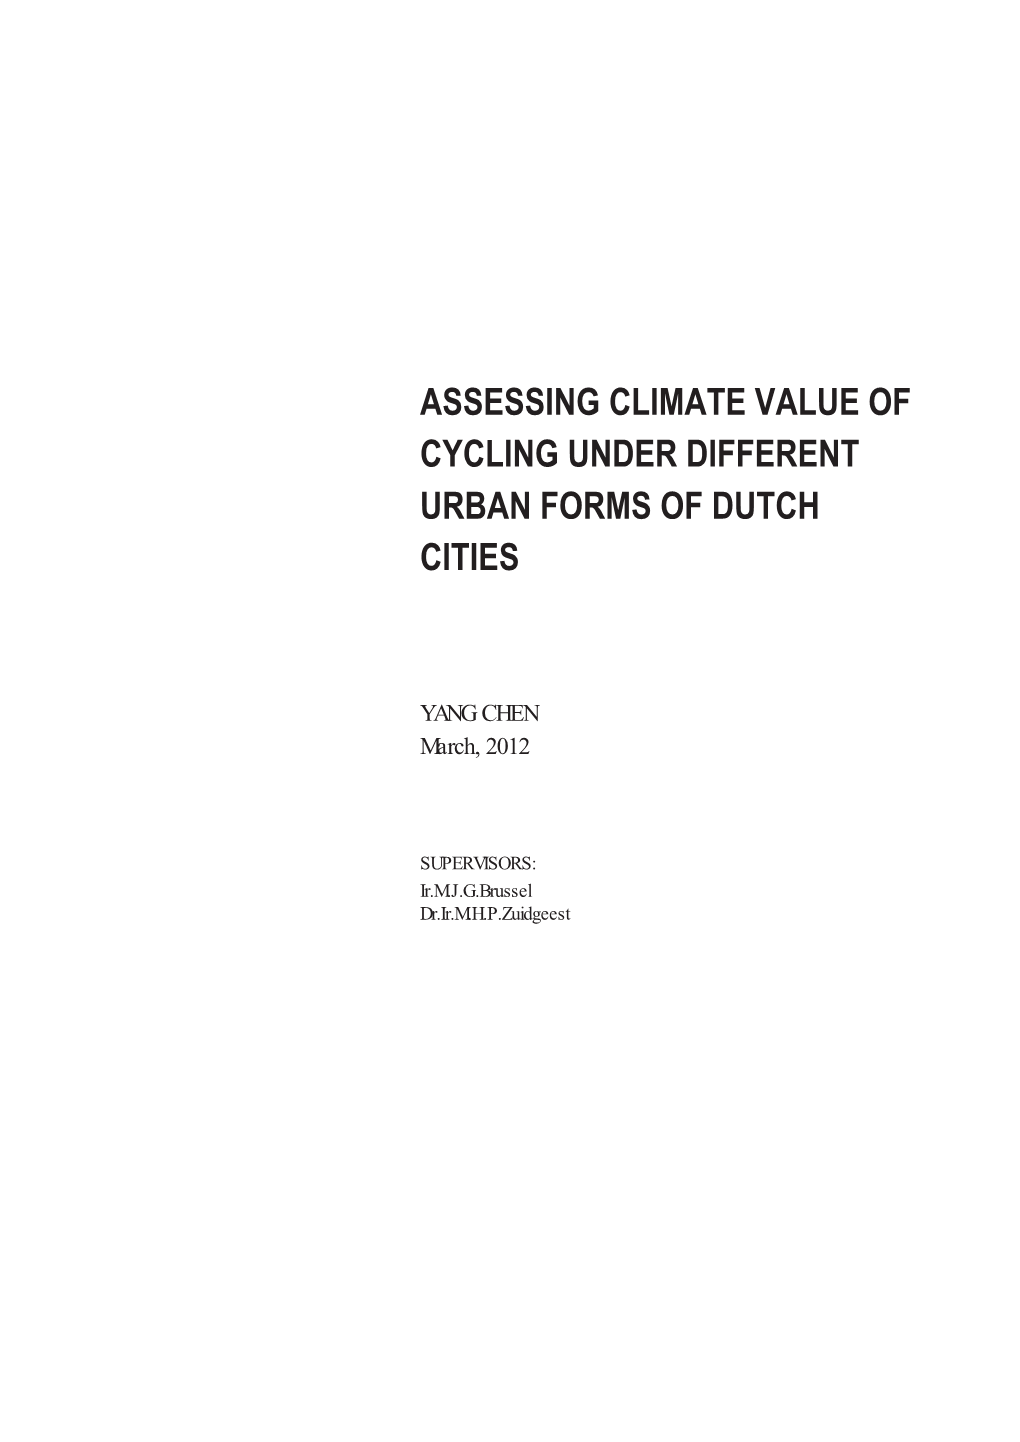 Assessing Climate Value of Cycling Under Different Urban Forms of Dutch Cities